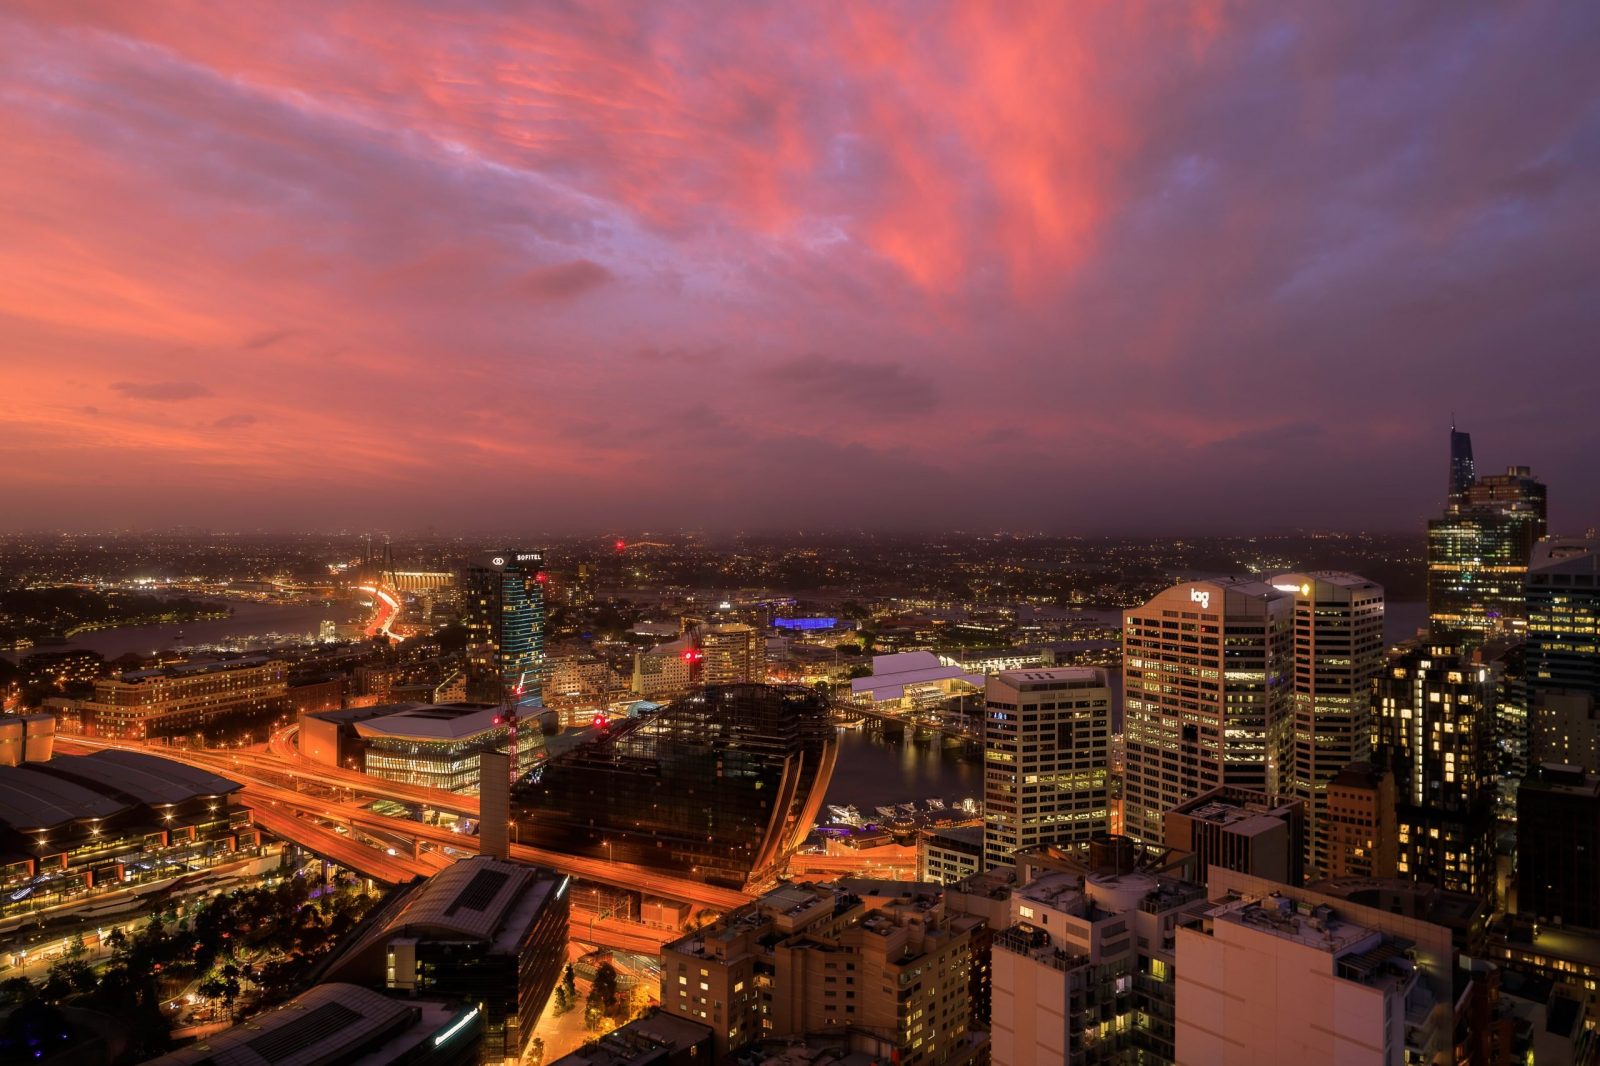 Photograph taken with the Canon 5D4 outside the Balcony of Meriton Suites, Kent Street.